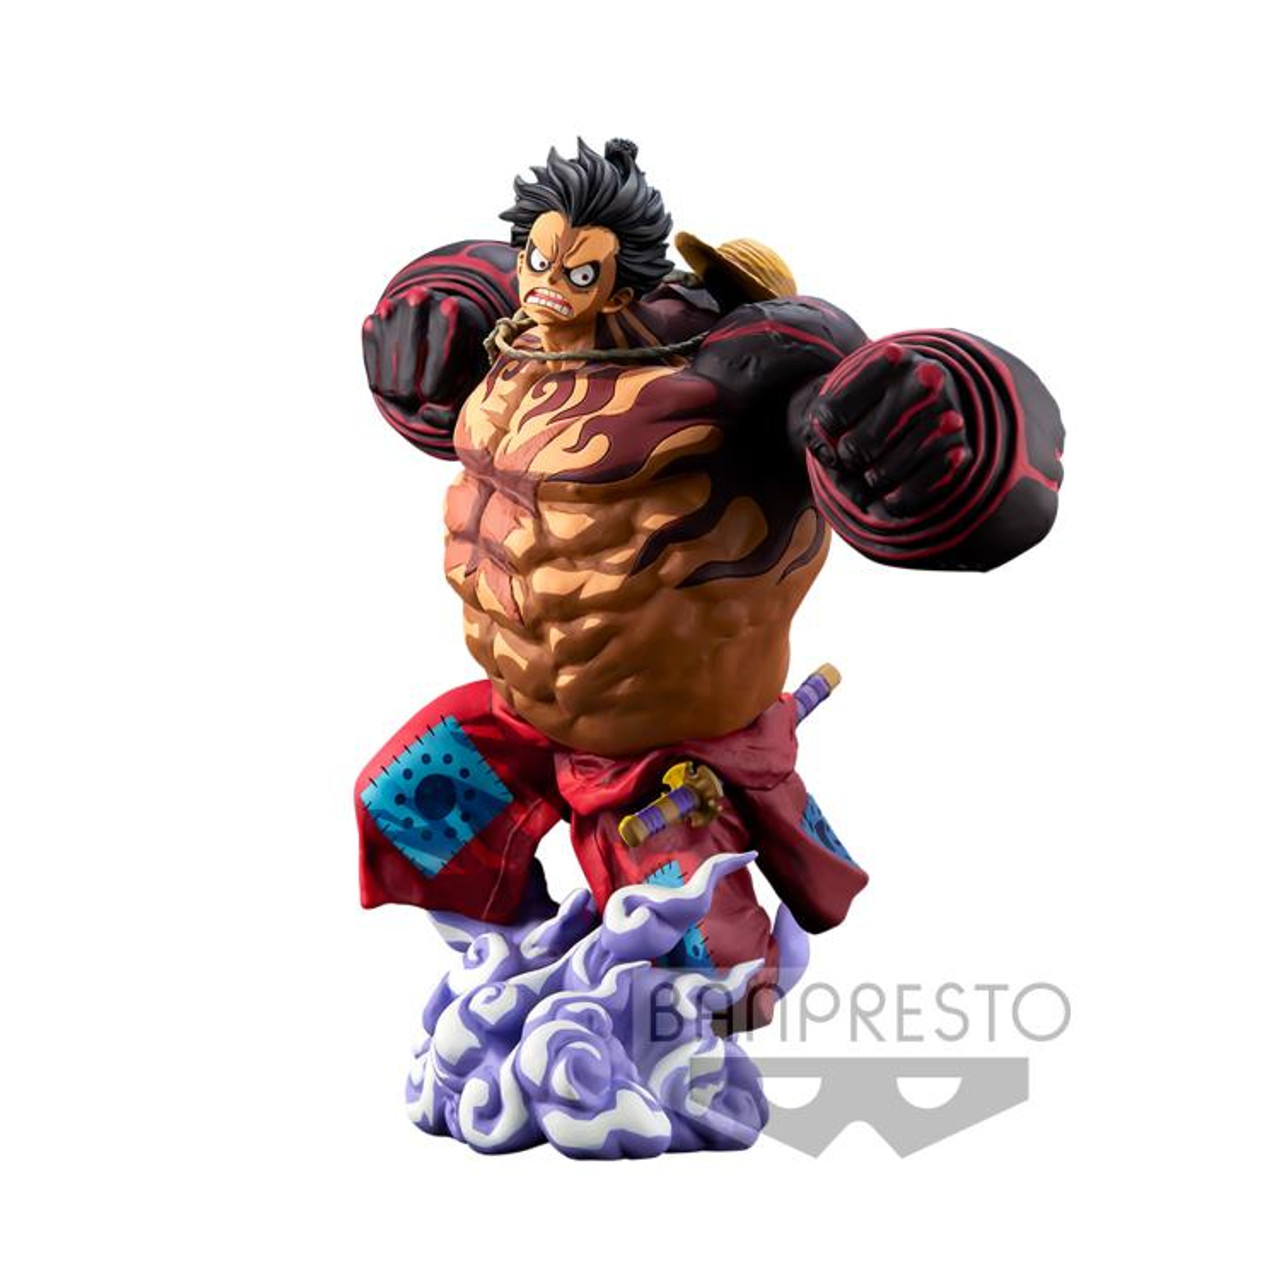 New One Piece Straw Hat Pirates Dragon Boat Figure Boxed Statue